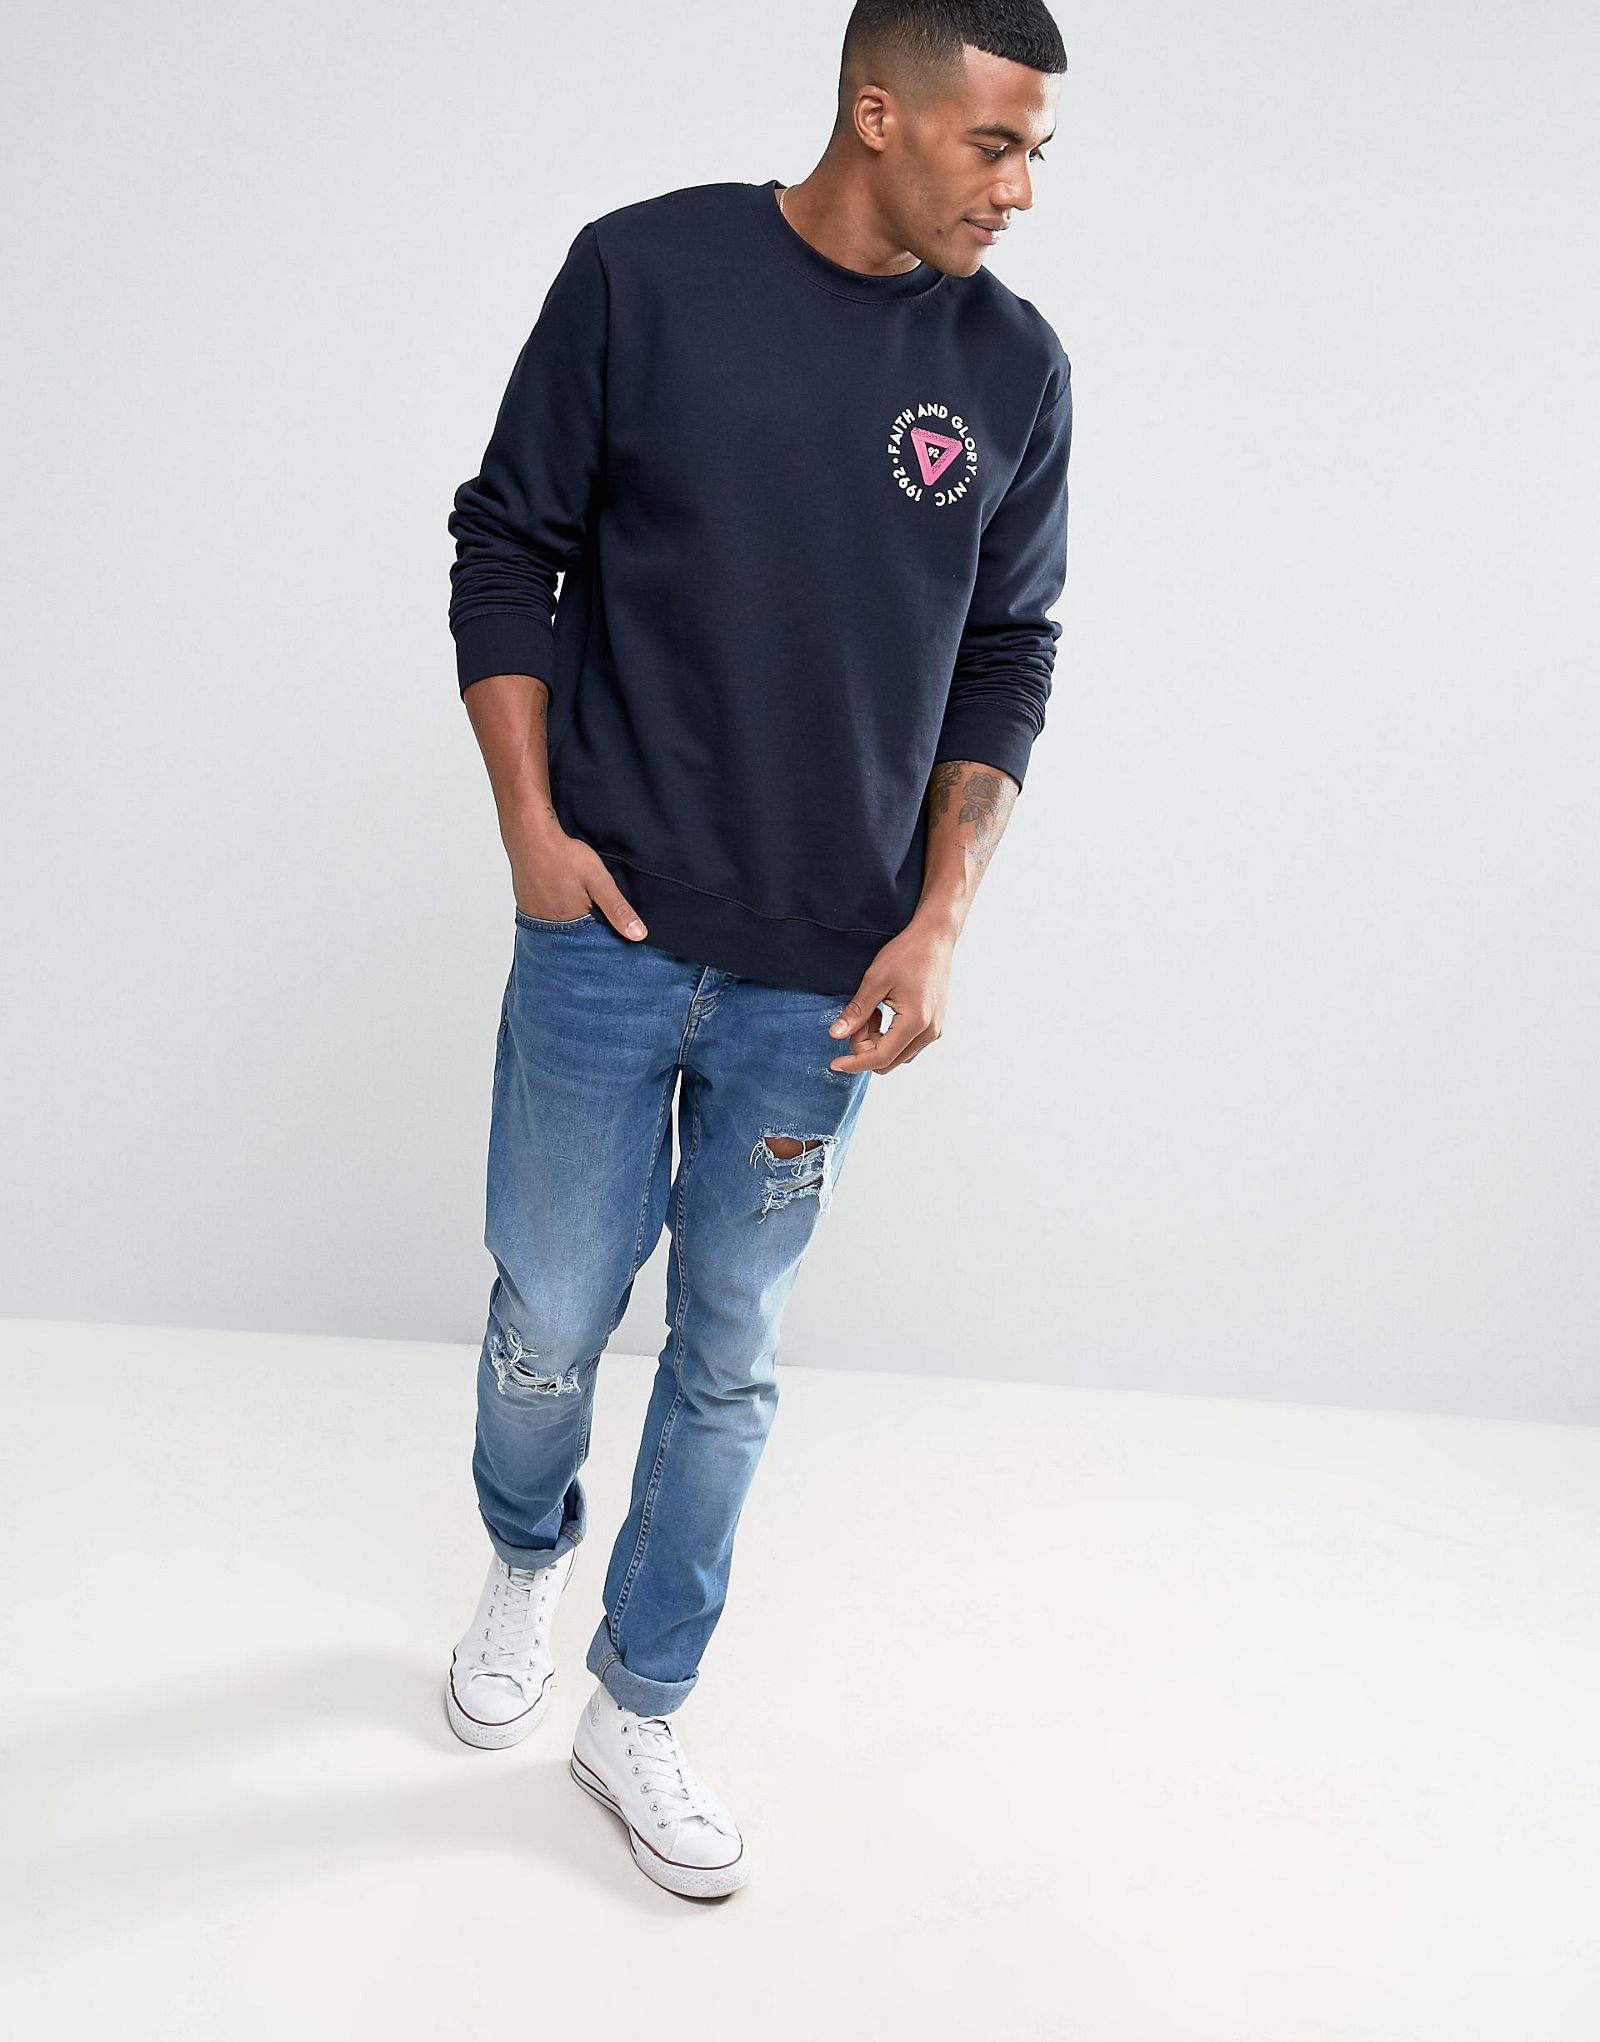 River Island Sweatshirt With Faith And Glory Motif In Navy